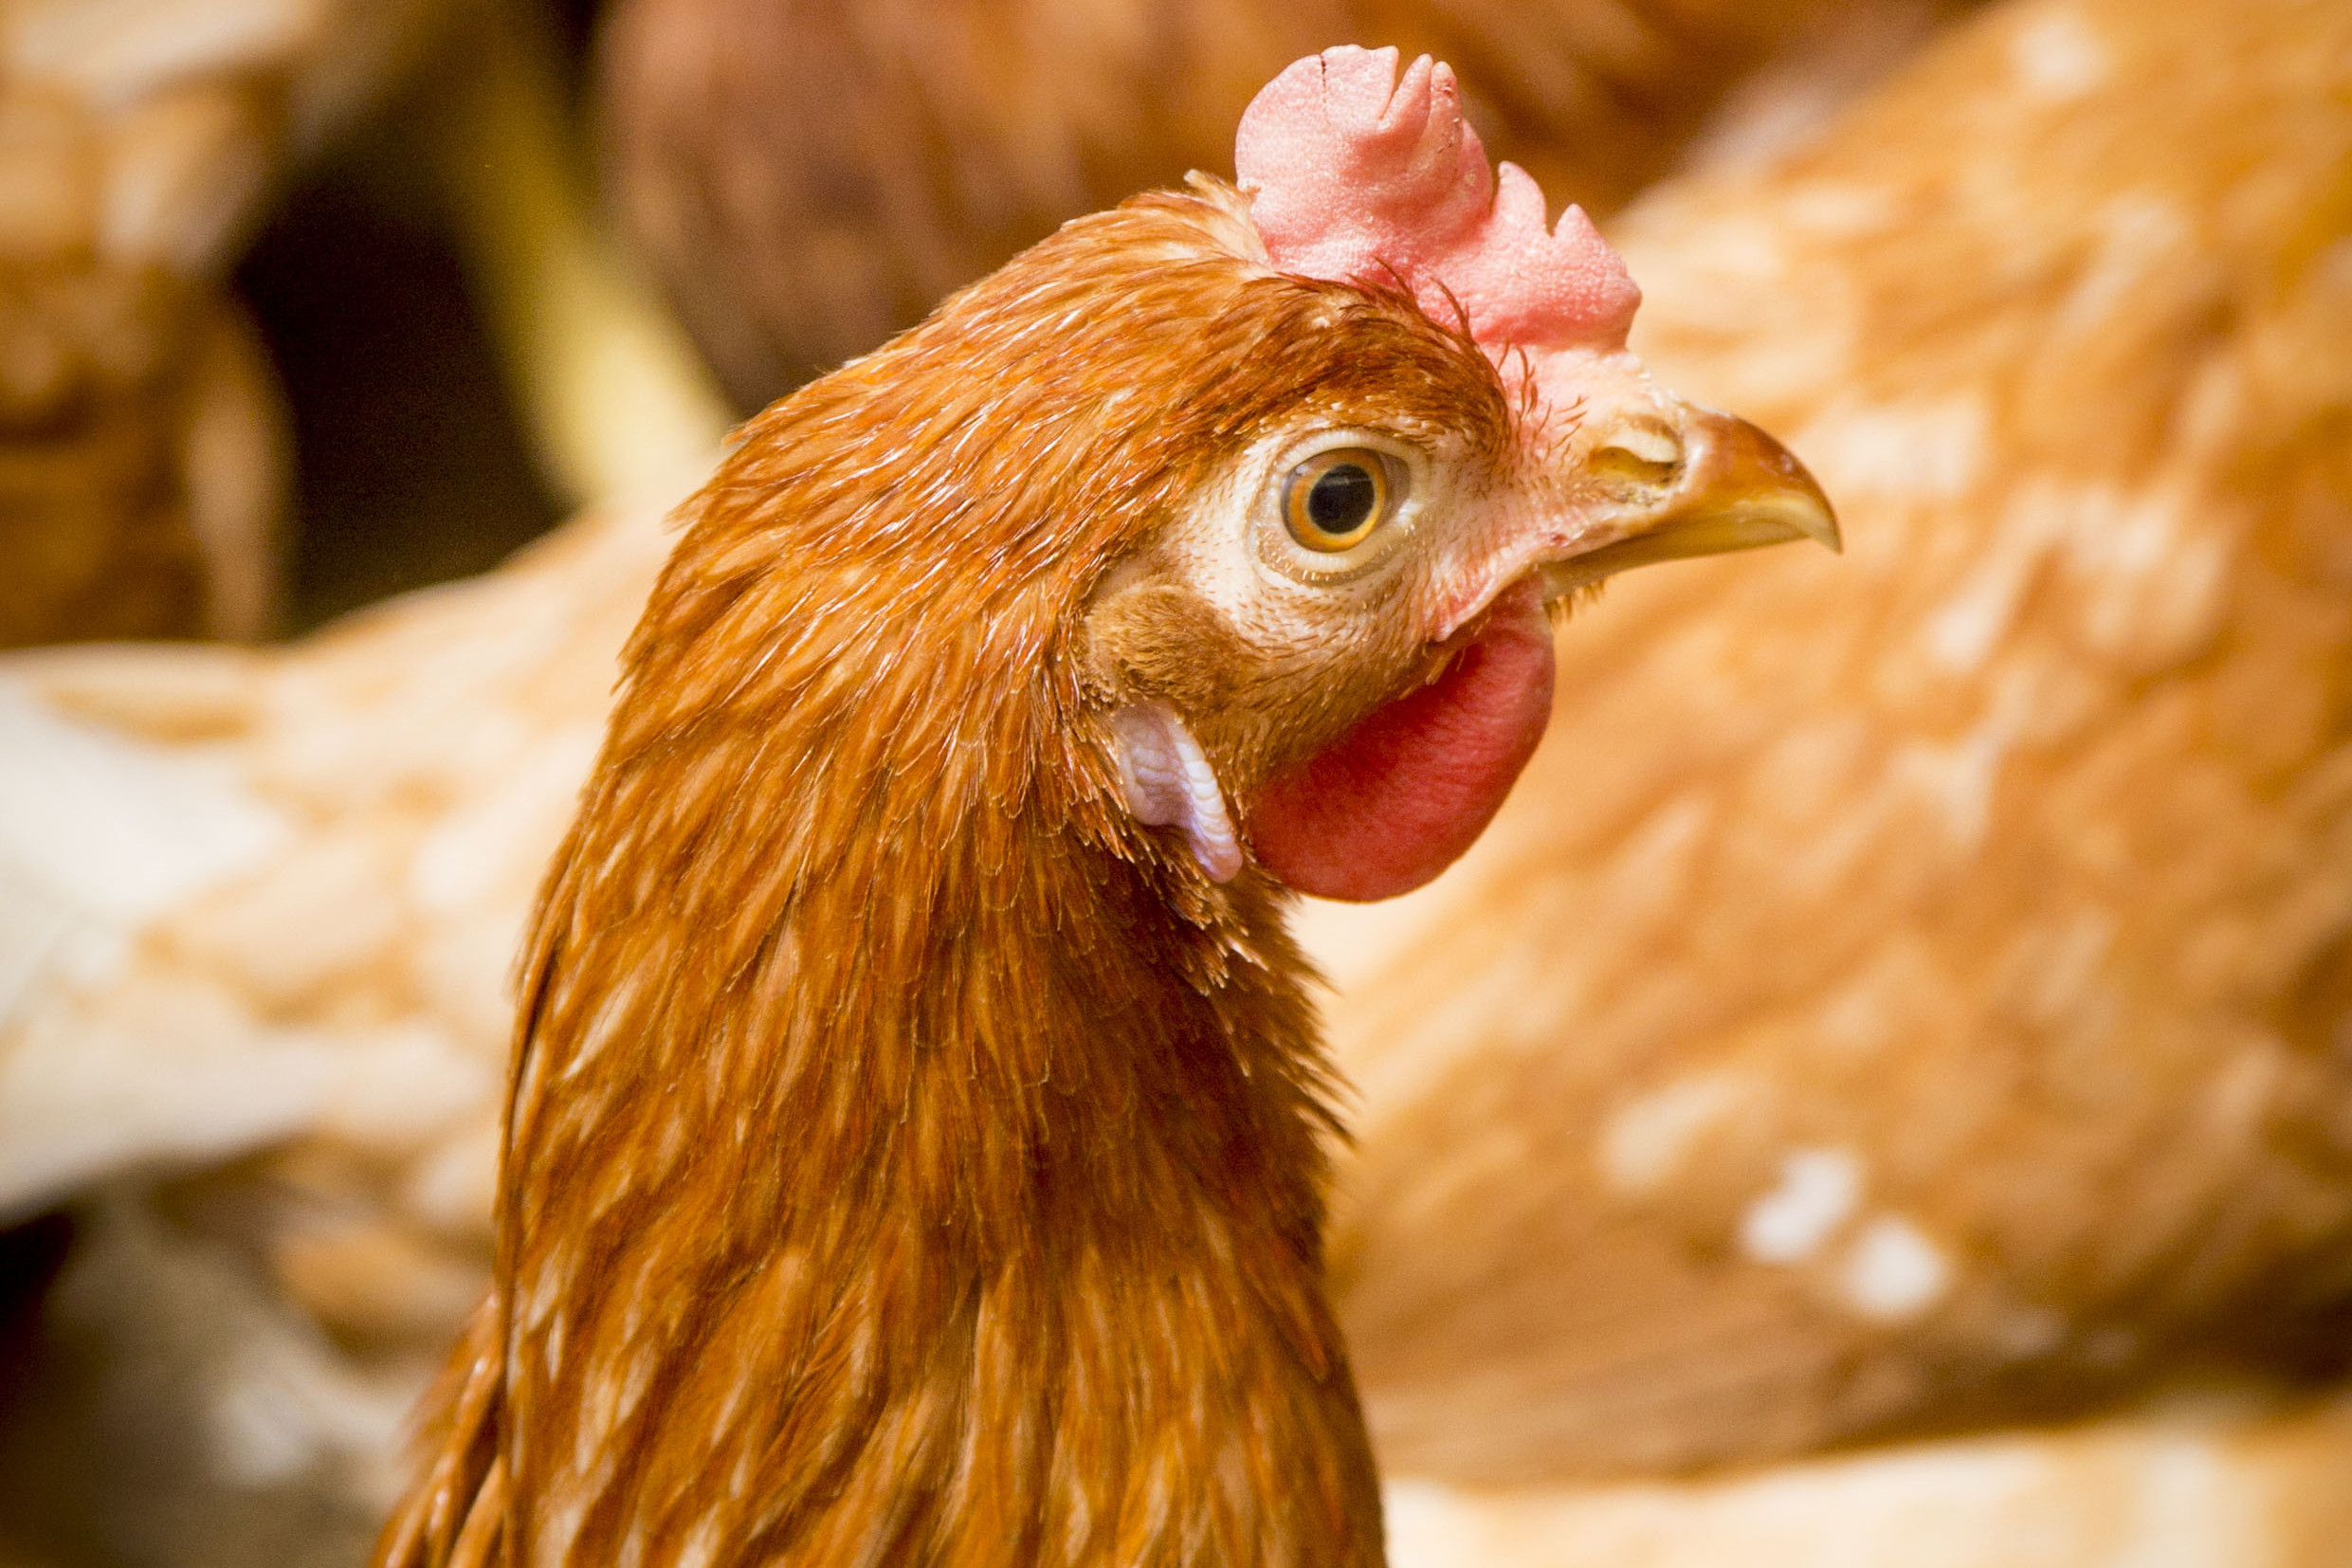 Feather pecking issues: Probiotics can help